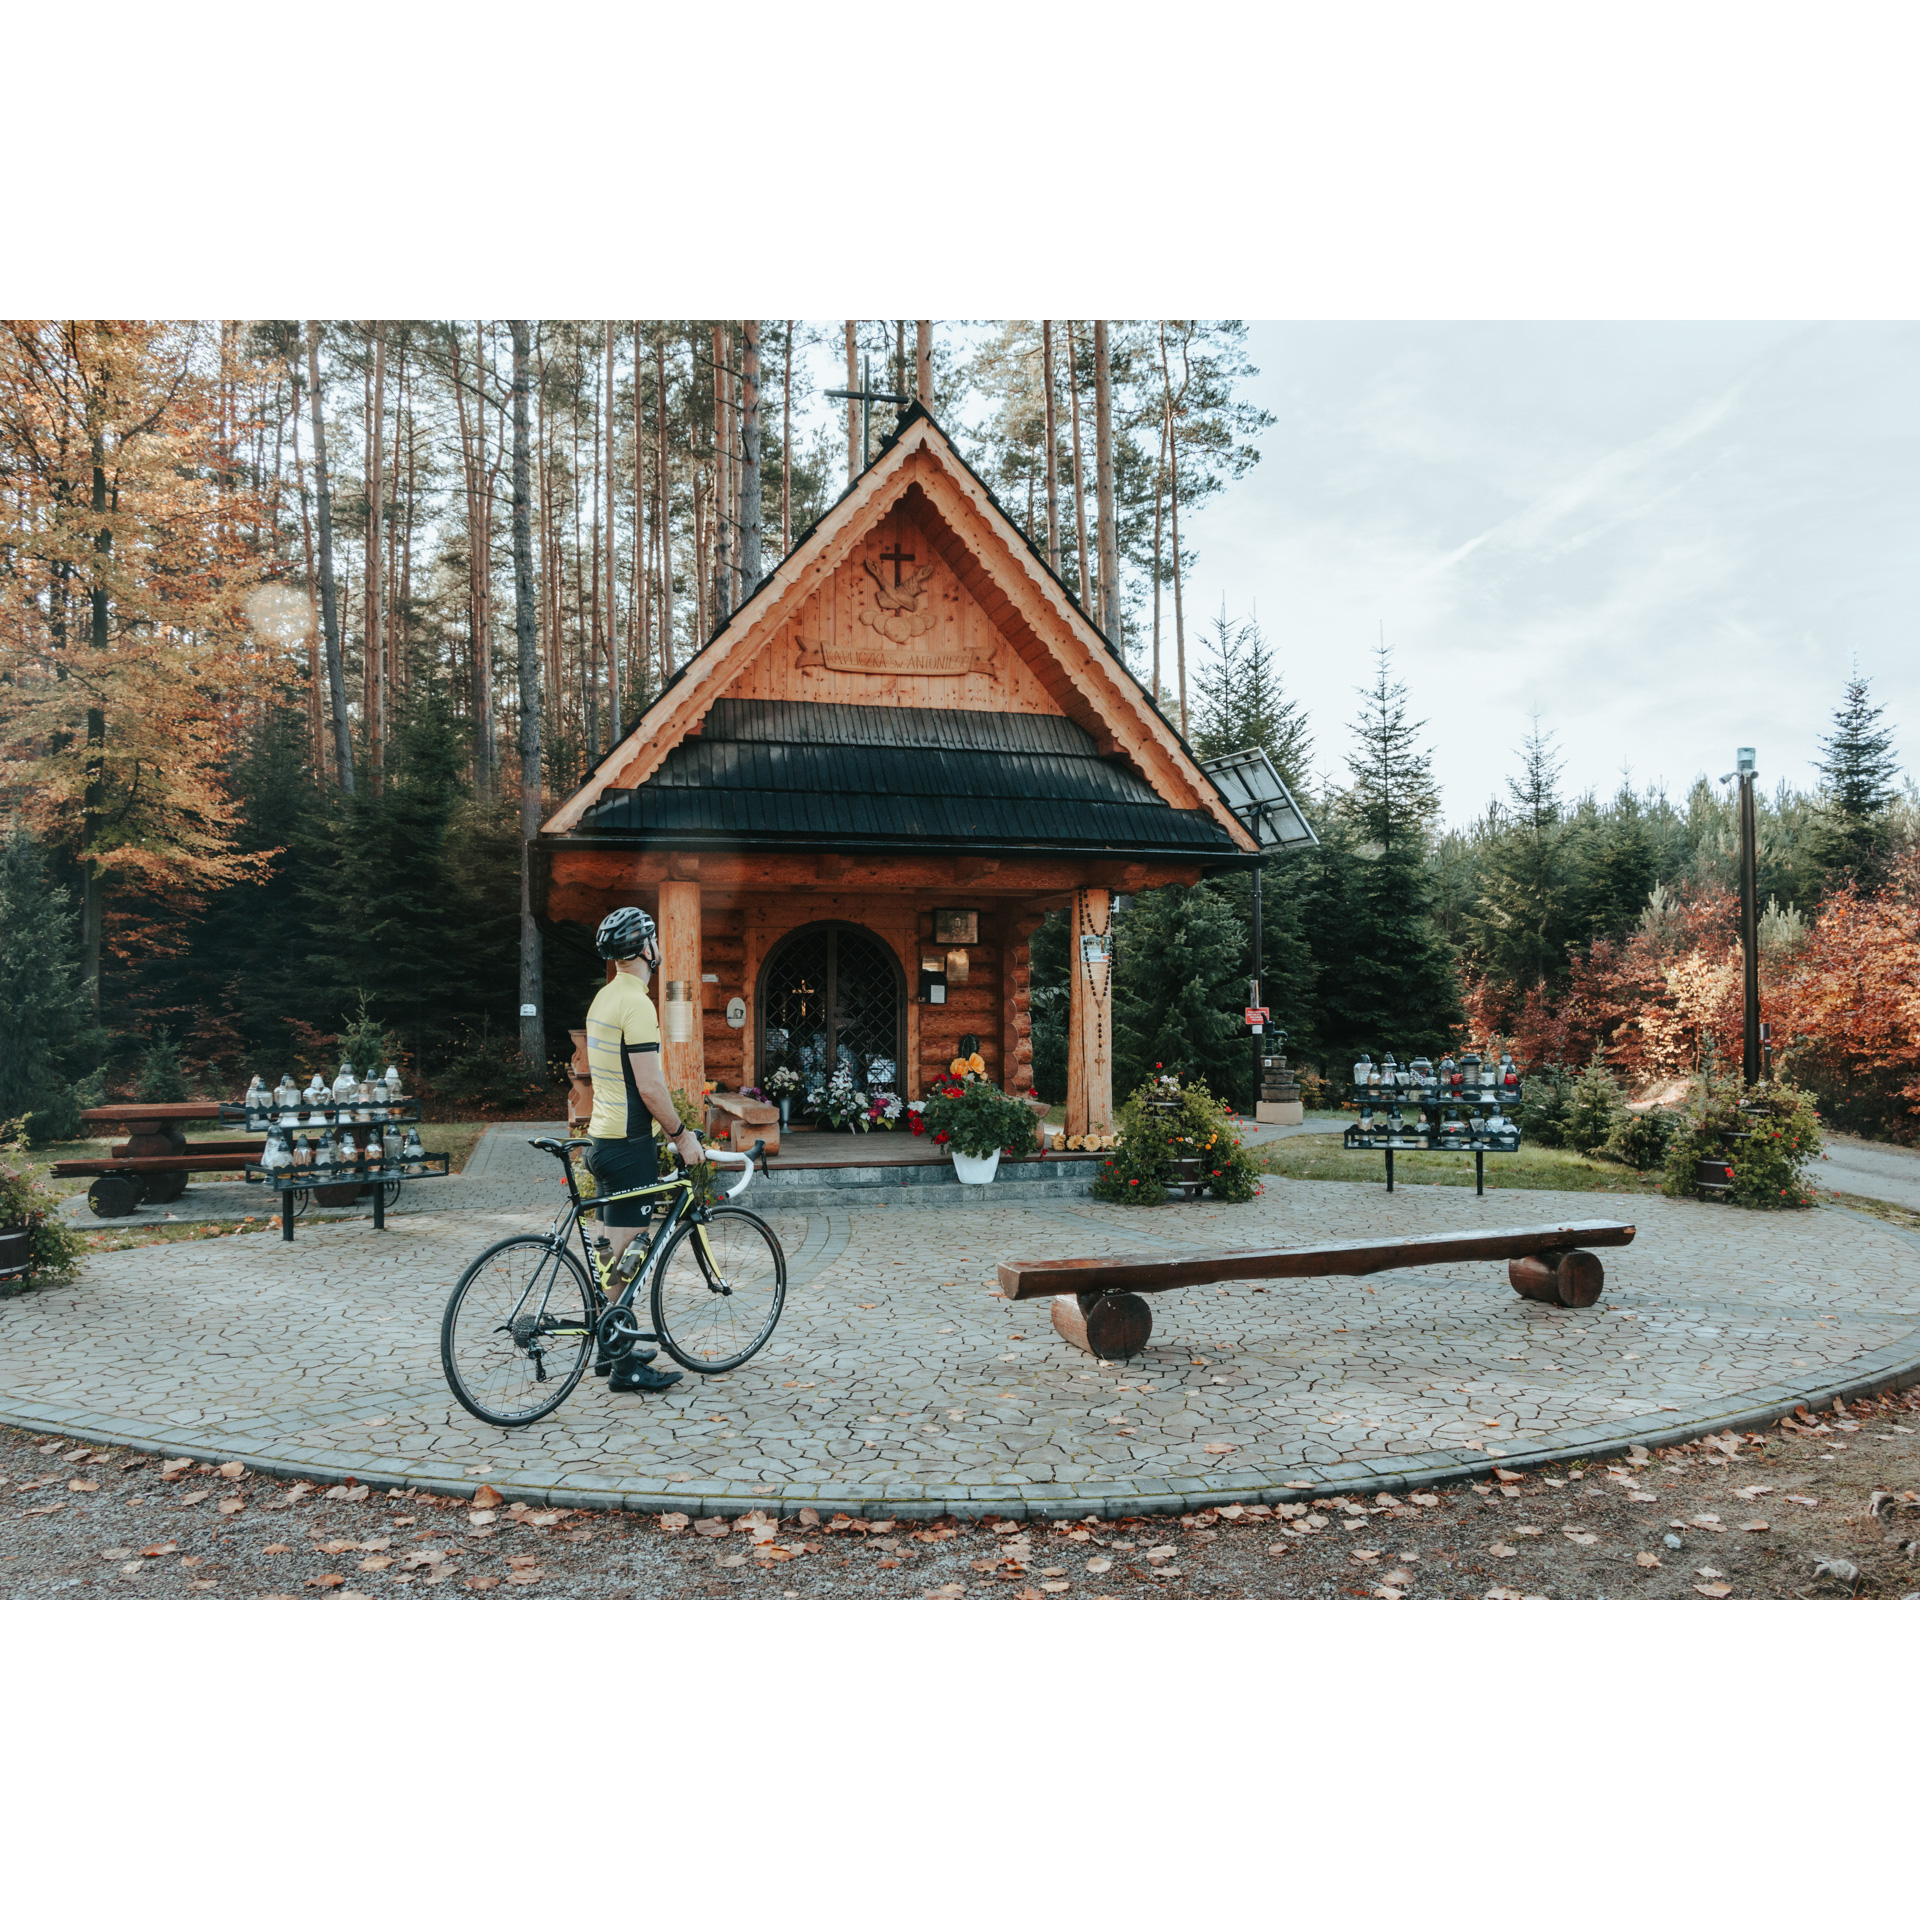 A wooden chapel in the middle of an autumn forest, located on a small paved square, surrounded by simple wooden benches, as well as candles and flowers, in the center a cyclist in a yellow sports outfit, a helmet, holding a bicycle